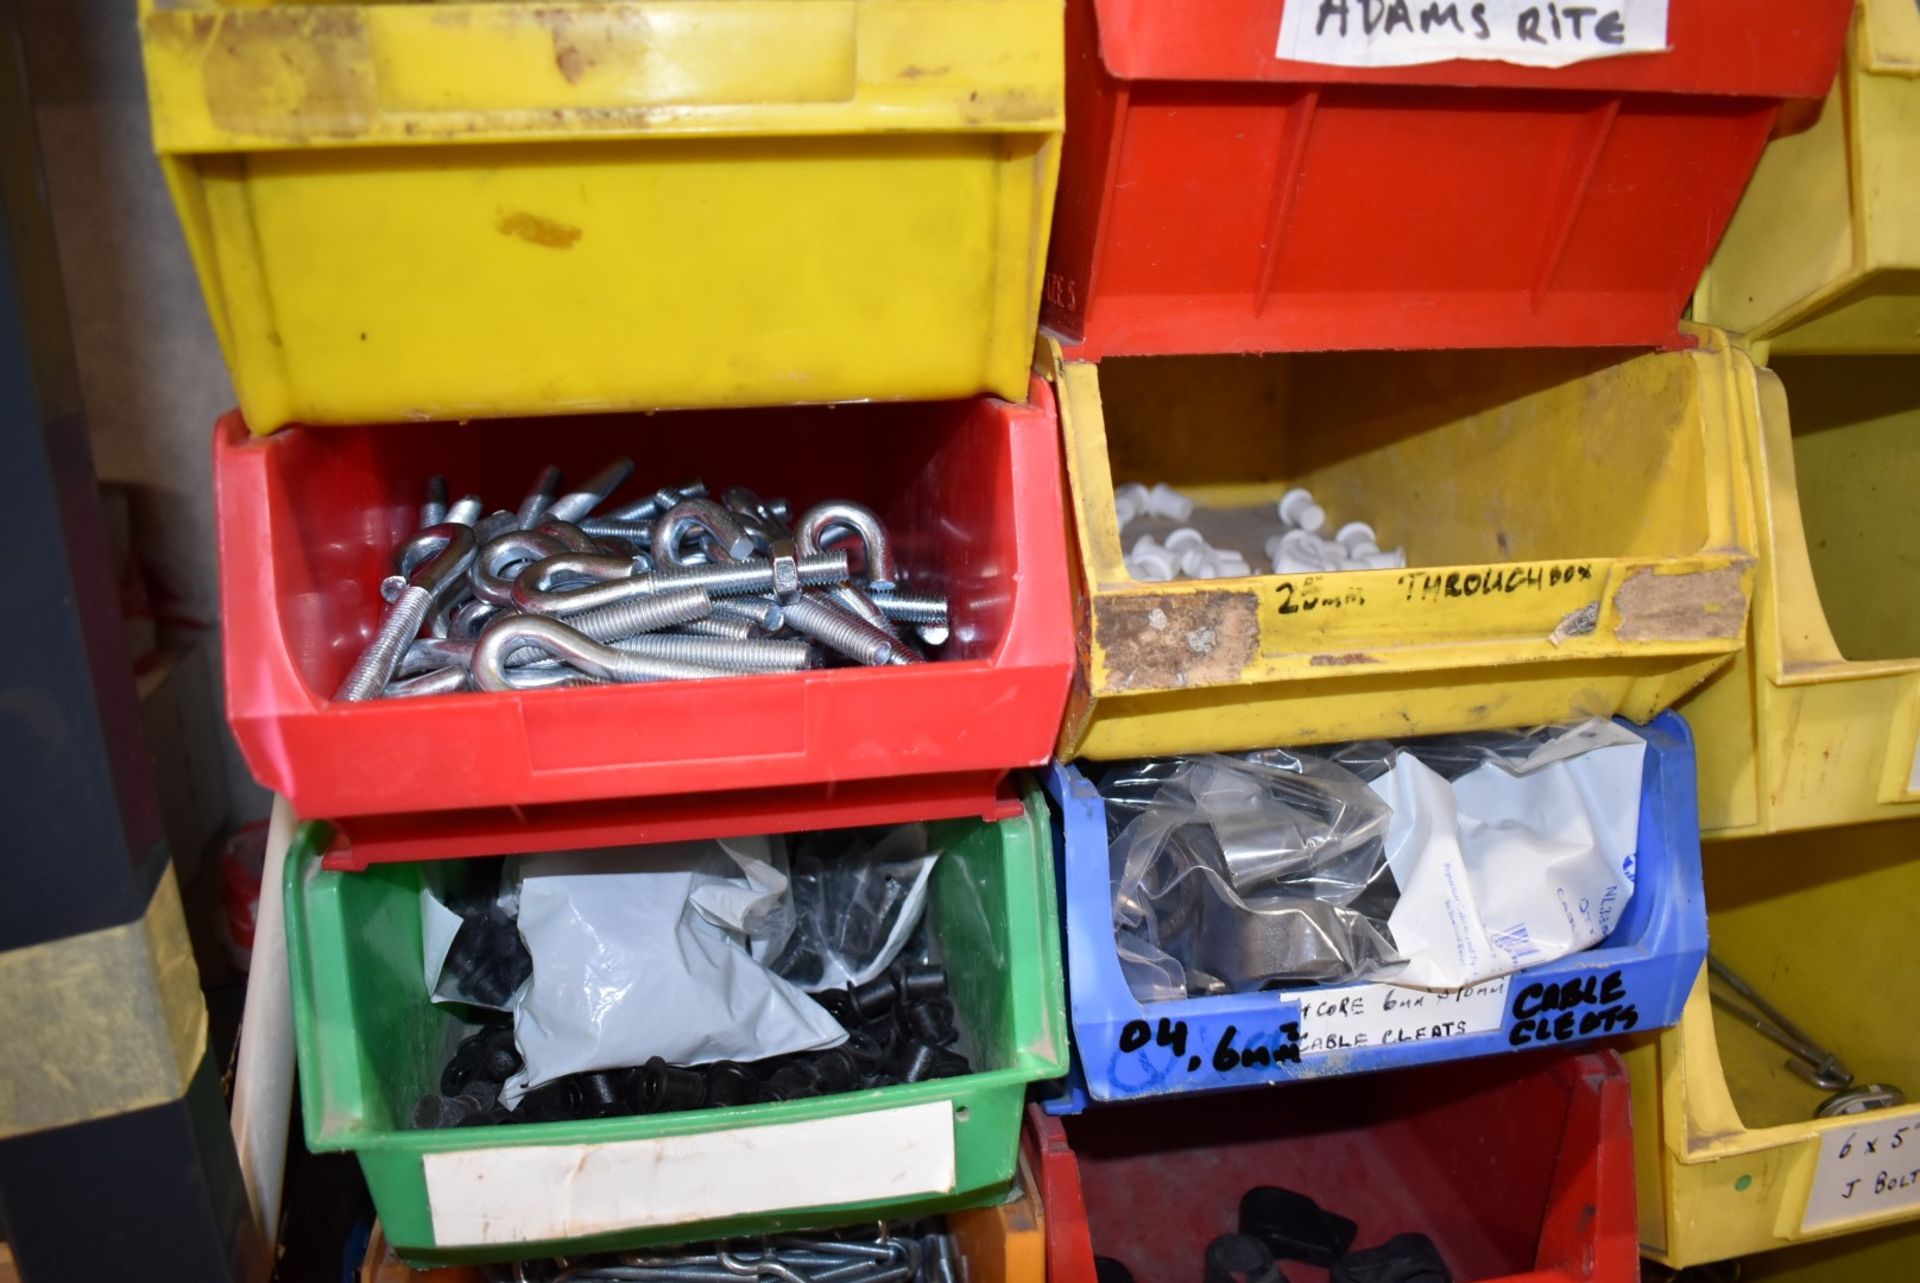 43 x Linbins With Contents - Clamps, Rod Connectors, Zebs, Washers, Bolts, Hex Nuts, Cleats & More! - Image 28 of 37